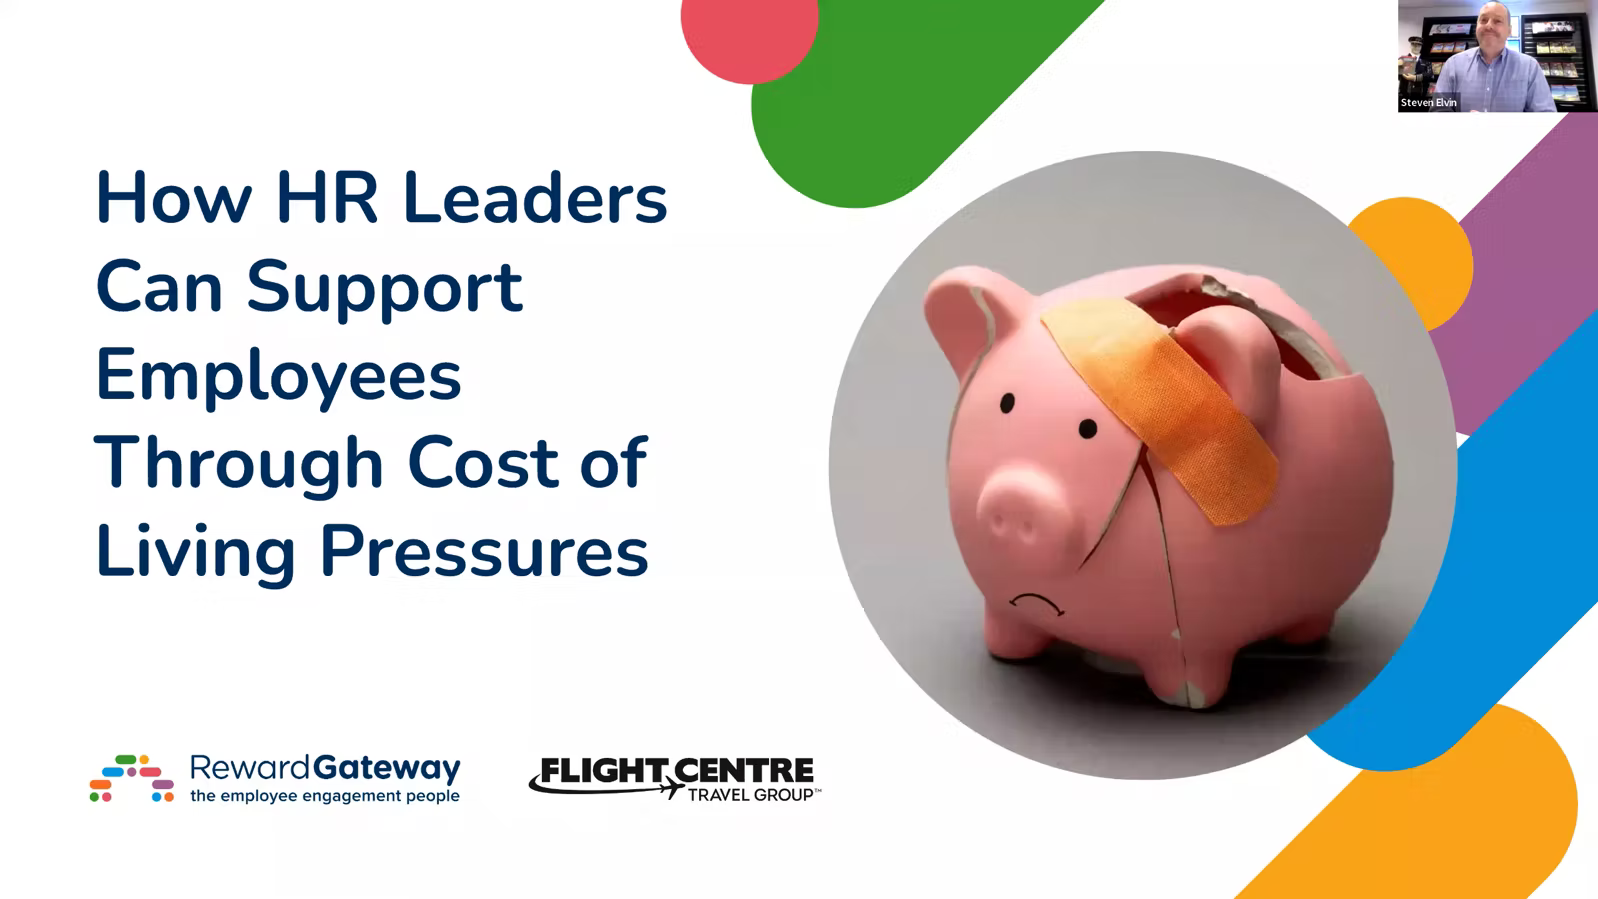 How HR Leaders Can Support Employees Through Cost of Living Pressures